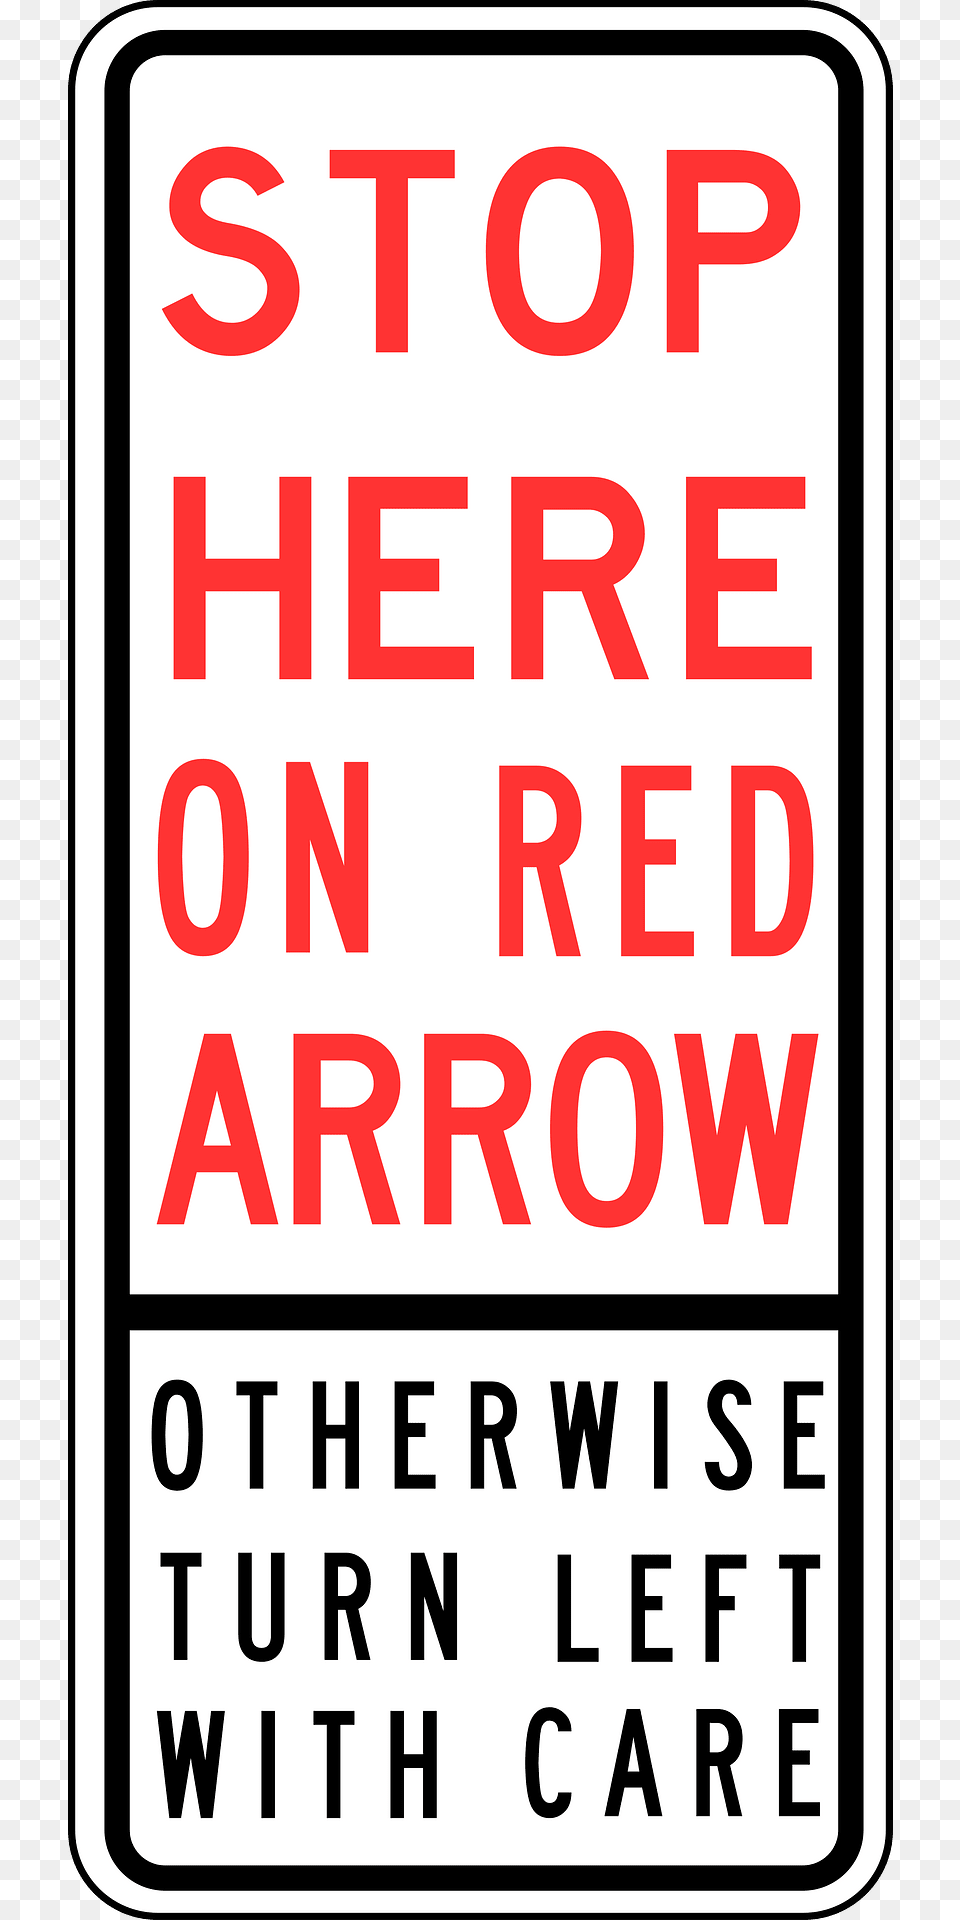 256 Stop Here On Red Arrow Otherwise Turn Left With Care Clipart, Text, Sign, Symbol Free Transparent Png